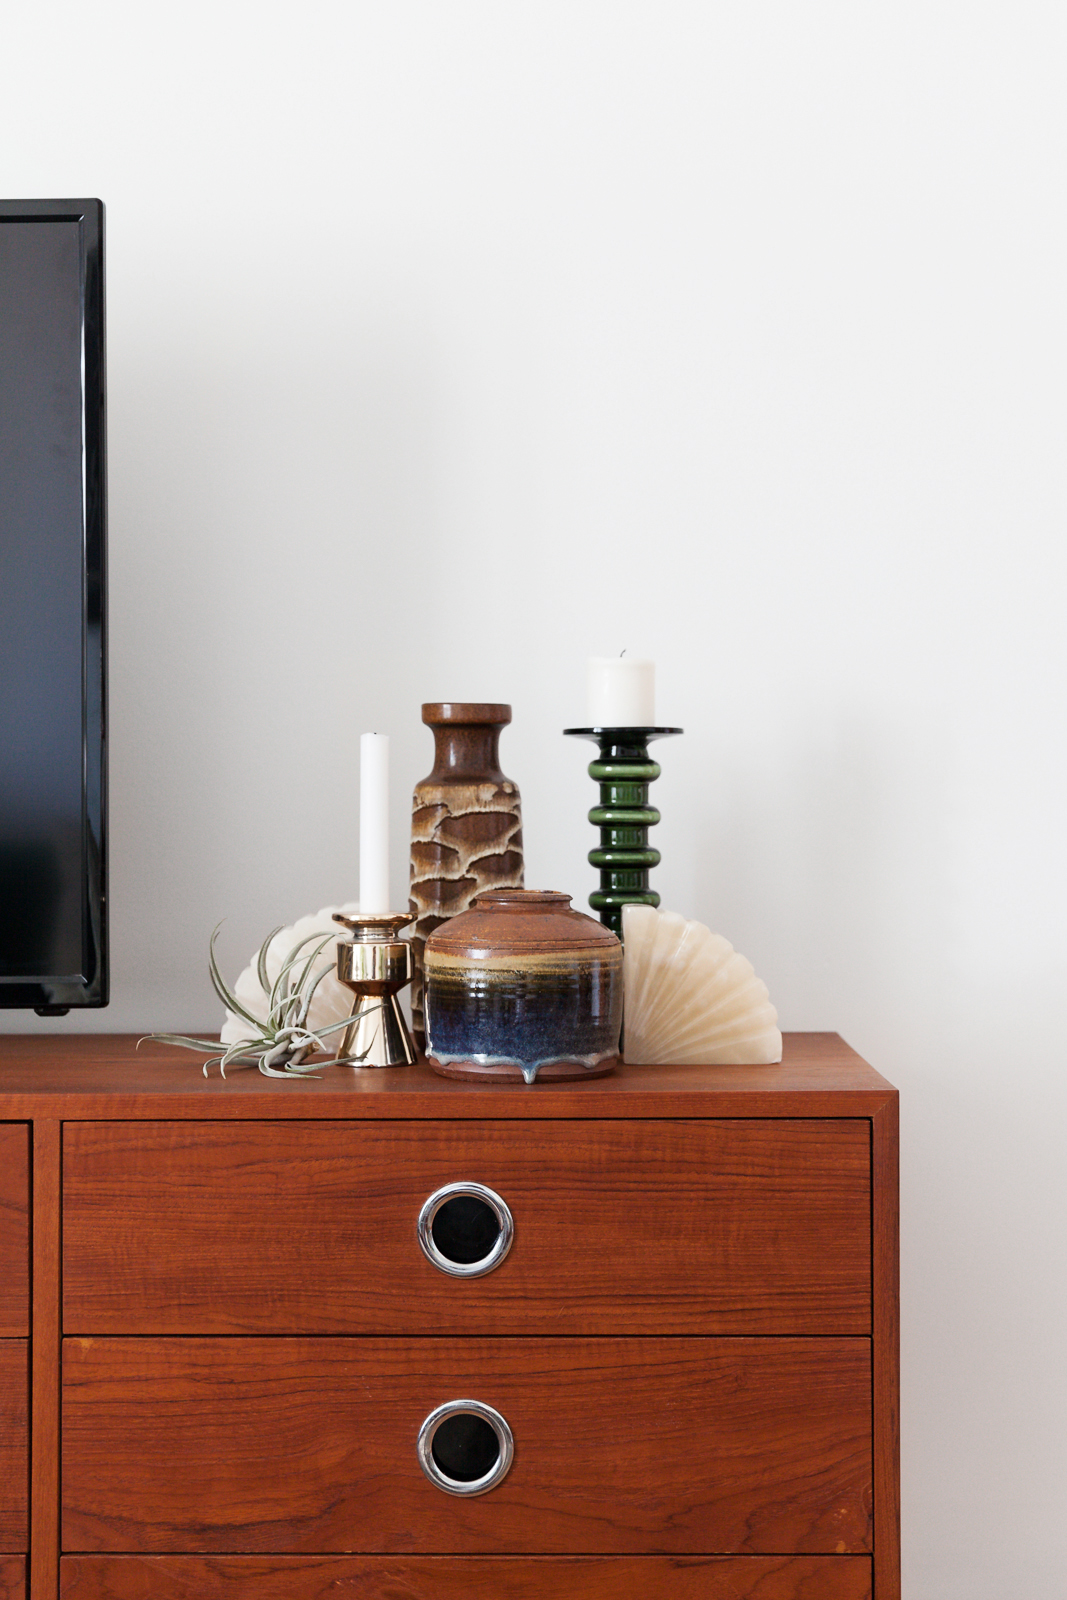 West German pottery, candles and an air plant on TV stand